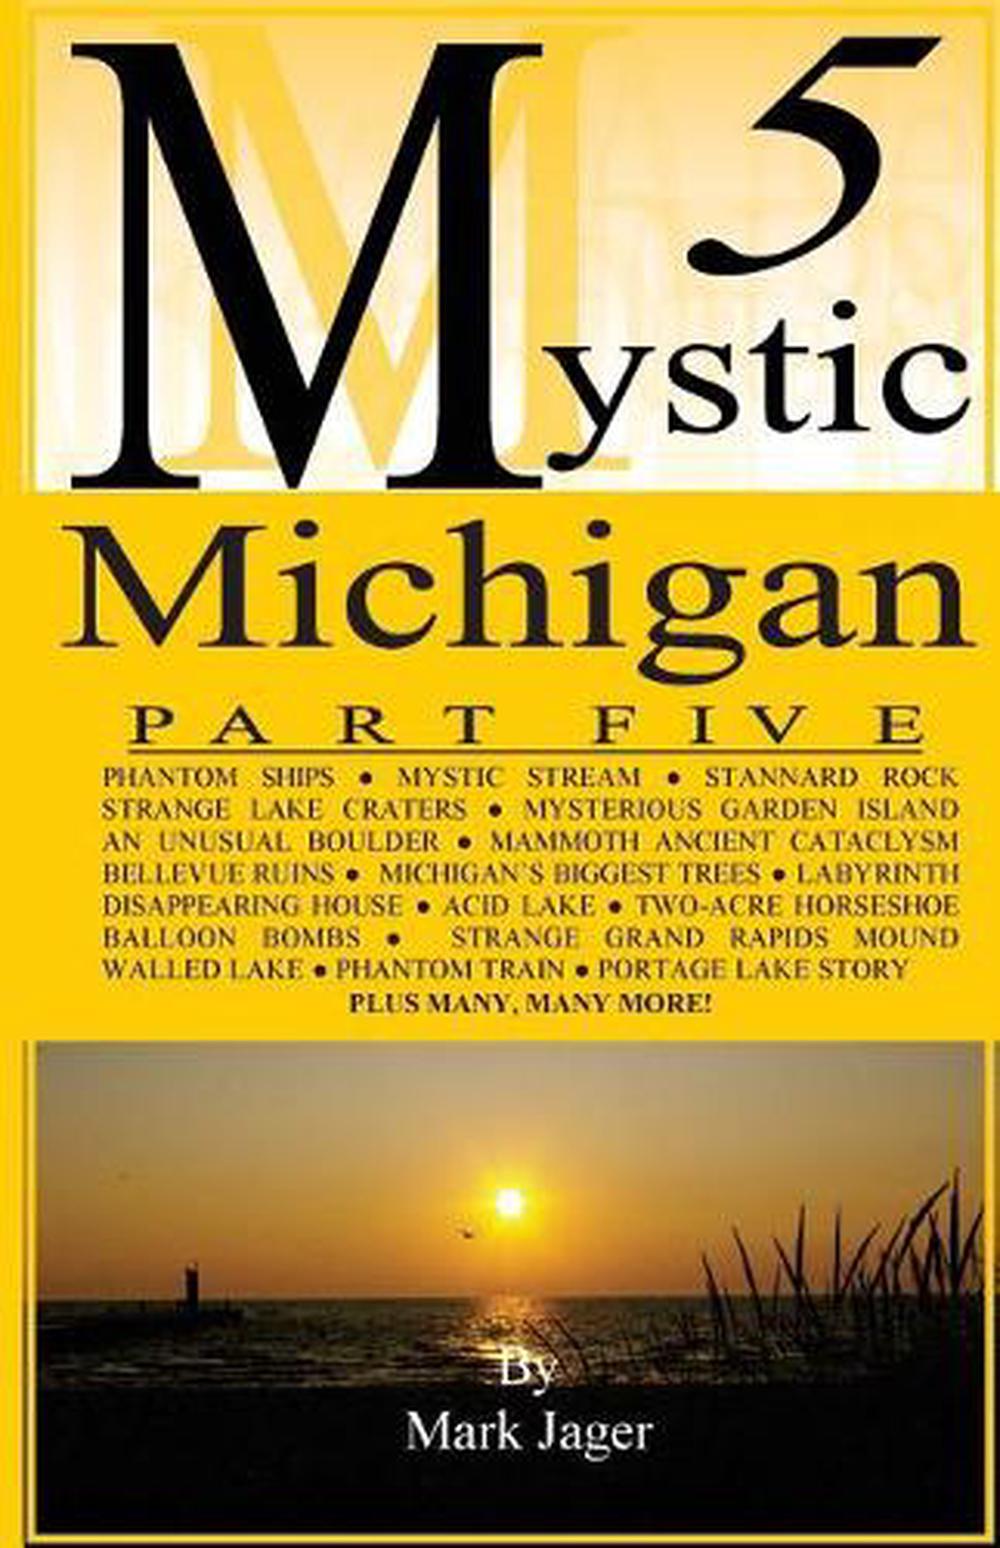 Mystic Michigan Part 5 by Mark Jager (English) Paperback Book Free Shipping! - Picture 1 of 1